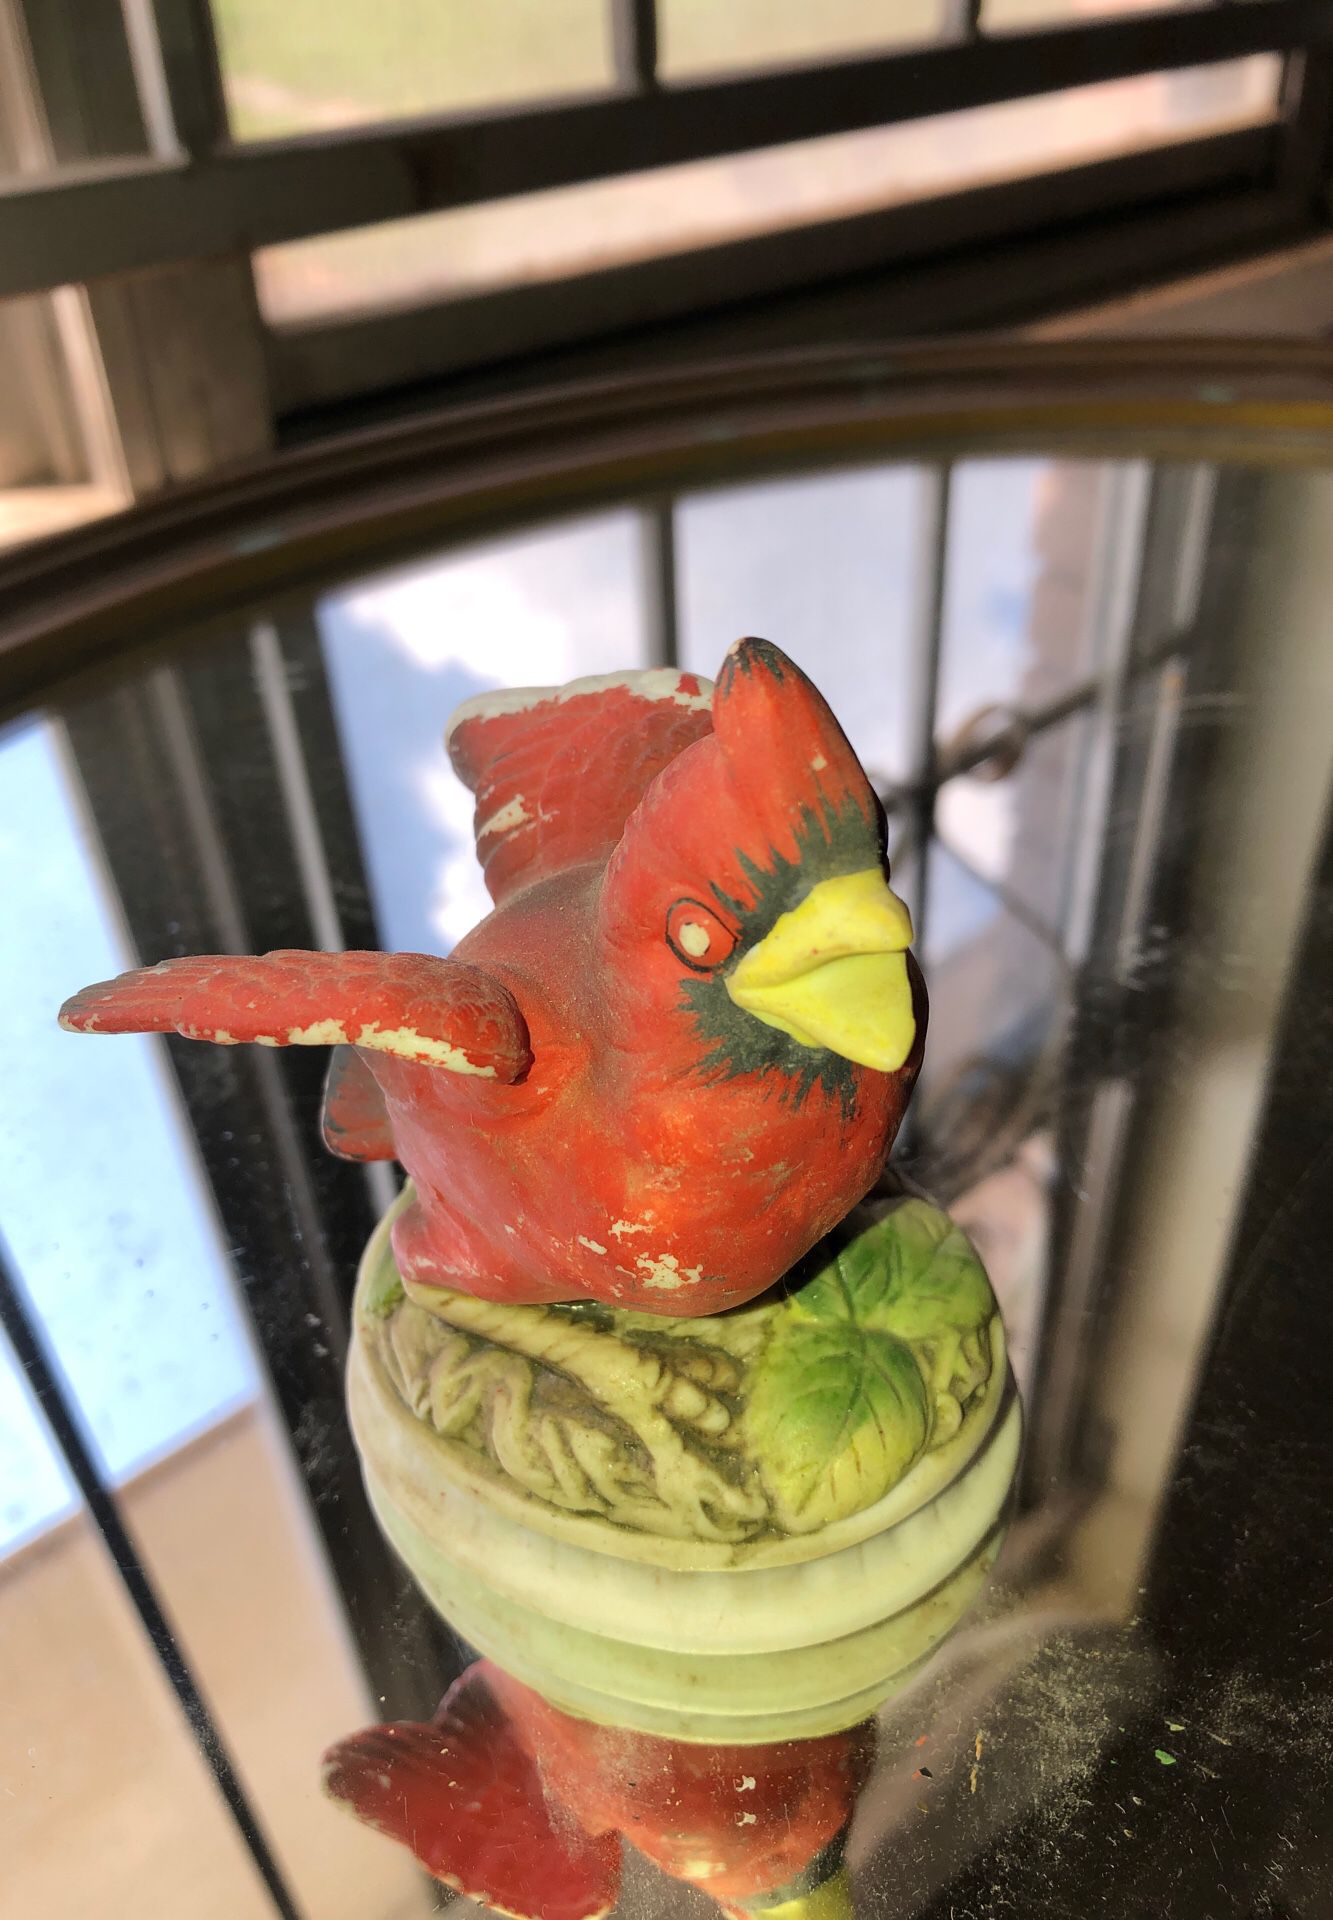 Collectible Red Robin Statue